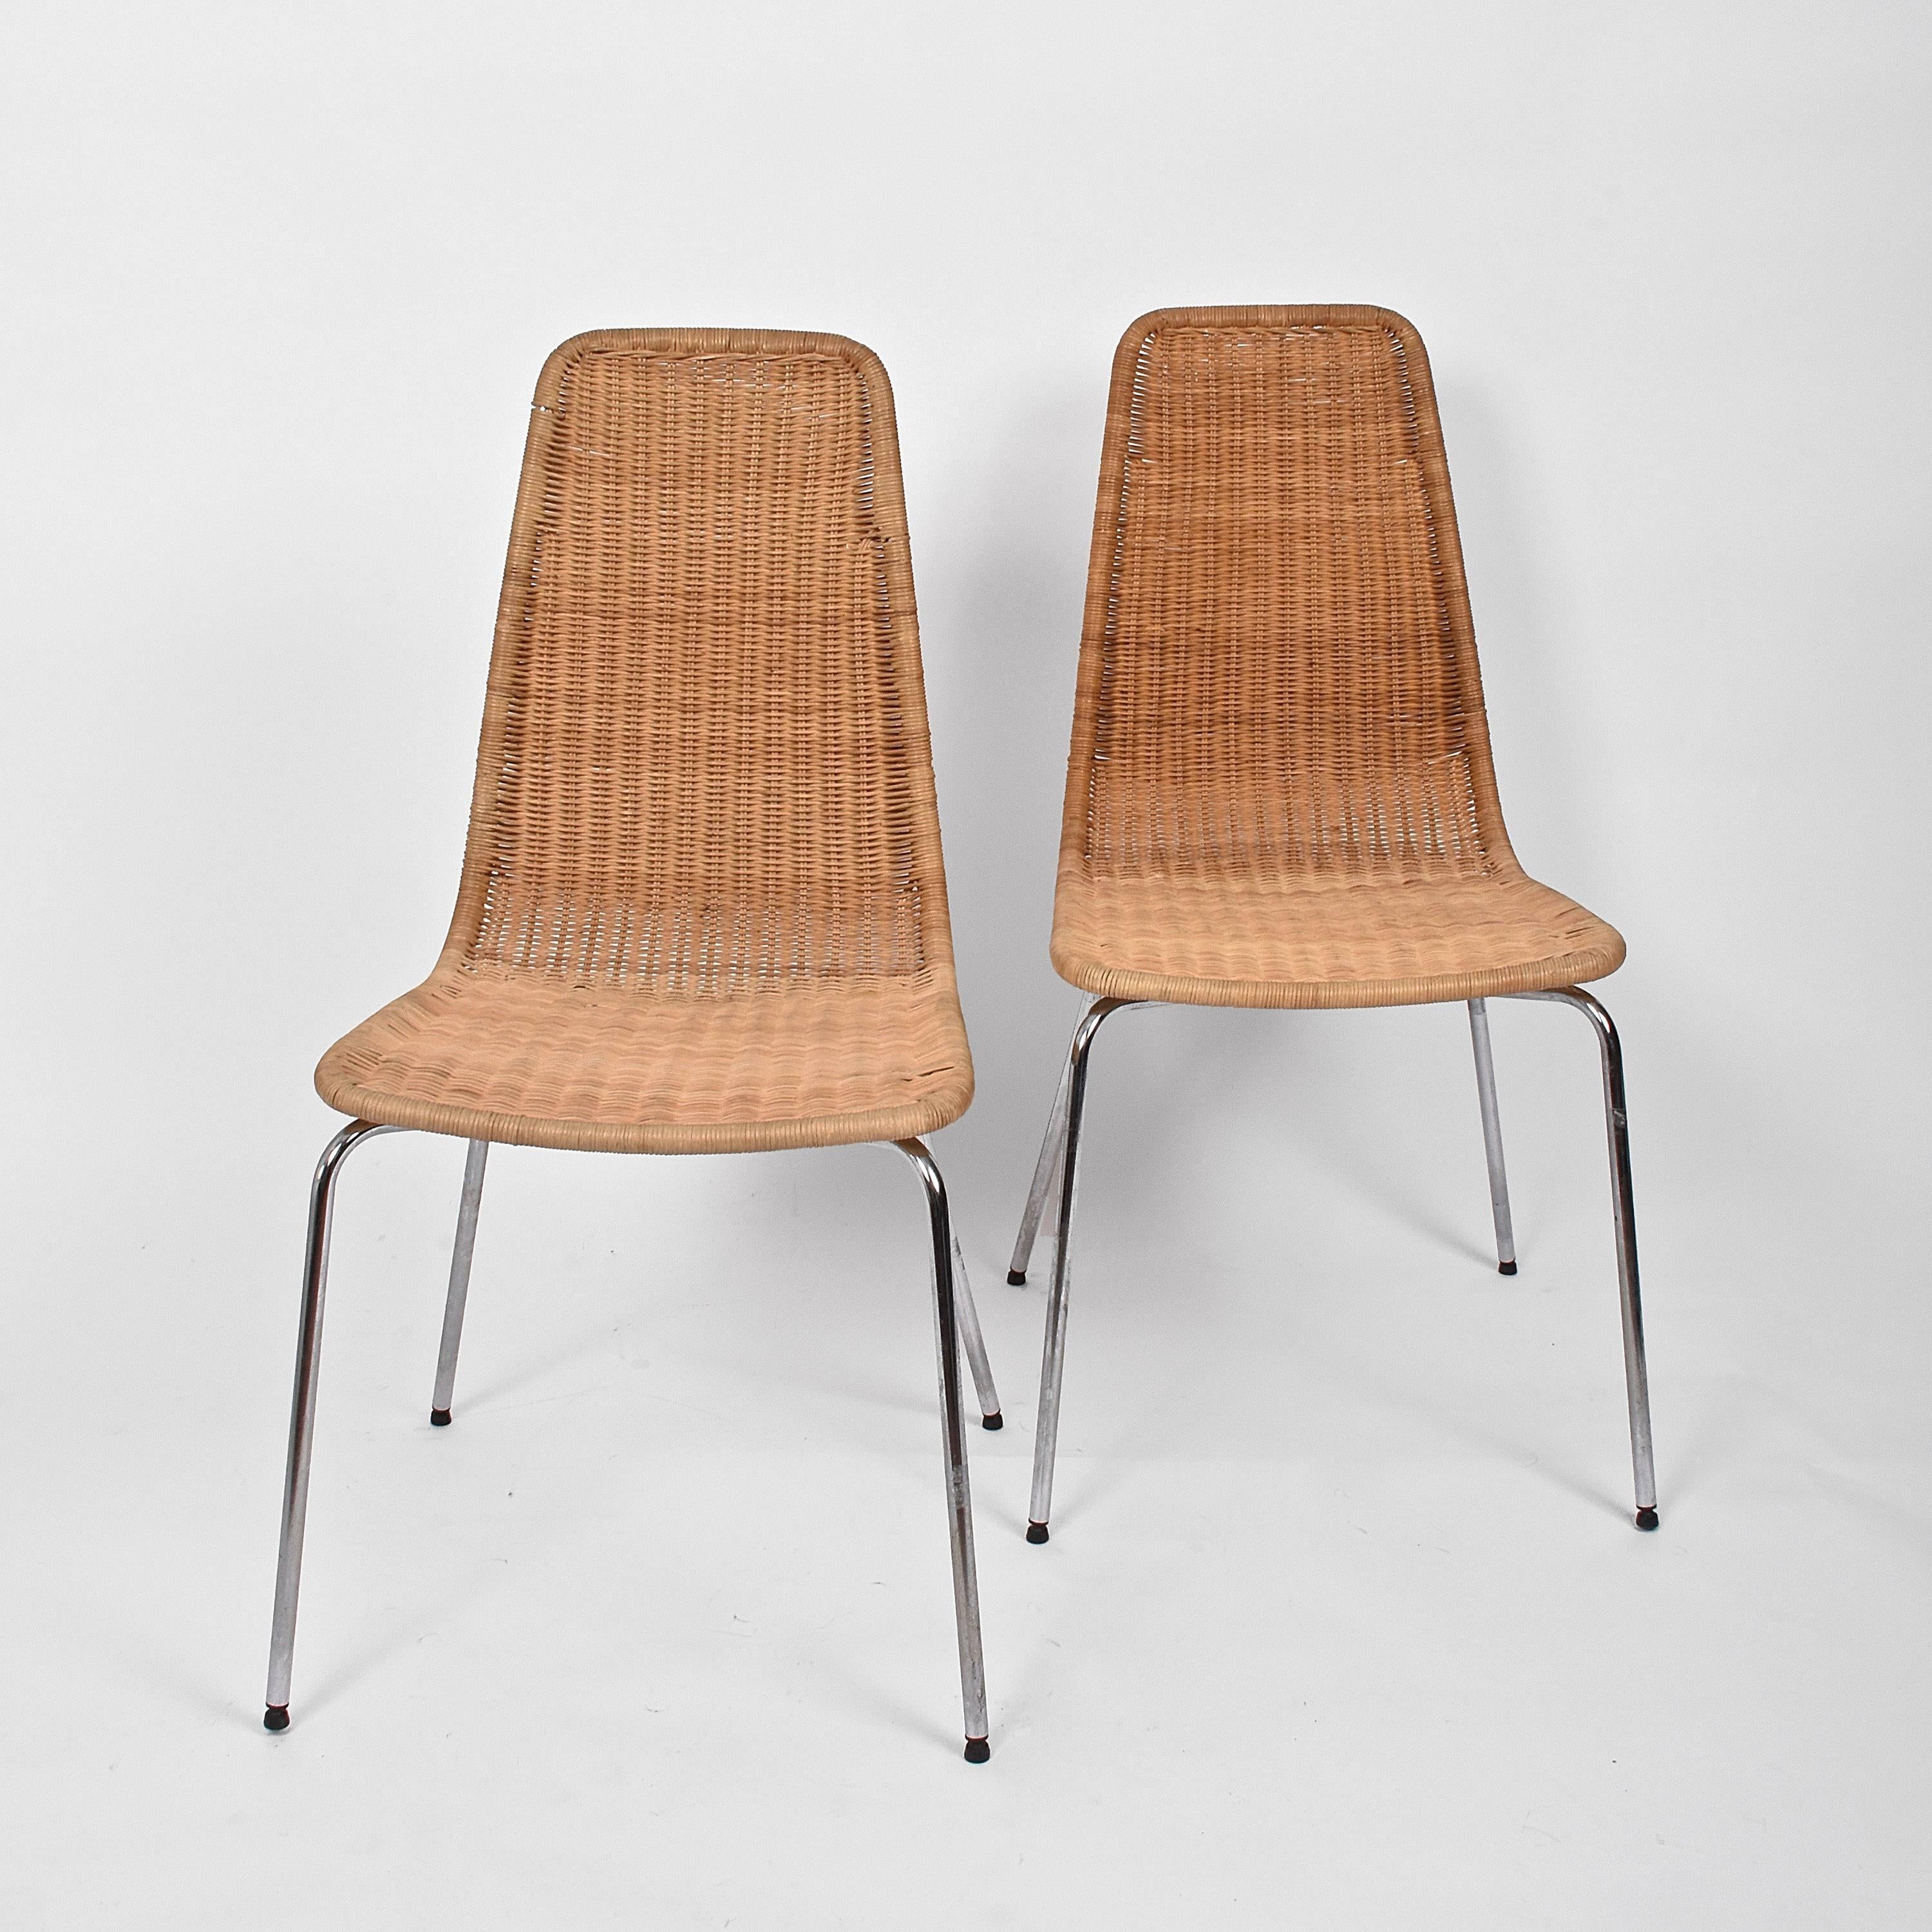 Late 20th Century Midcentury Removable Rattan and Wicker and Chromed Metal Italian Chairs, 1970s